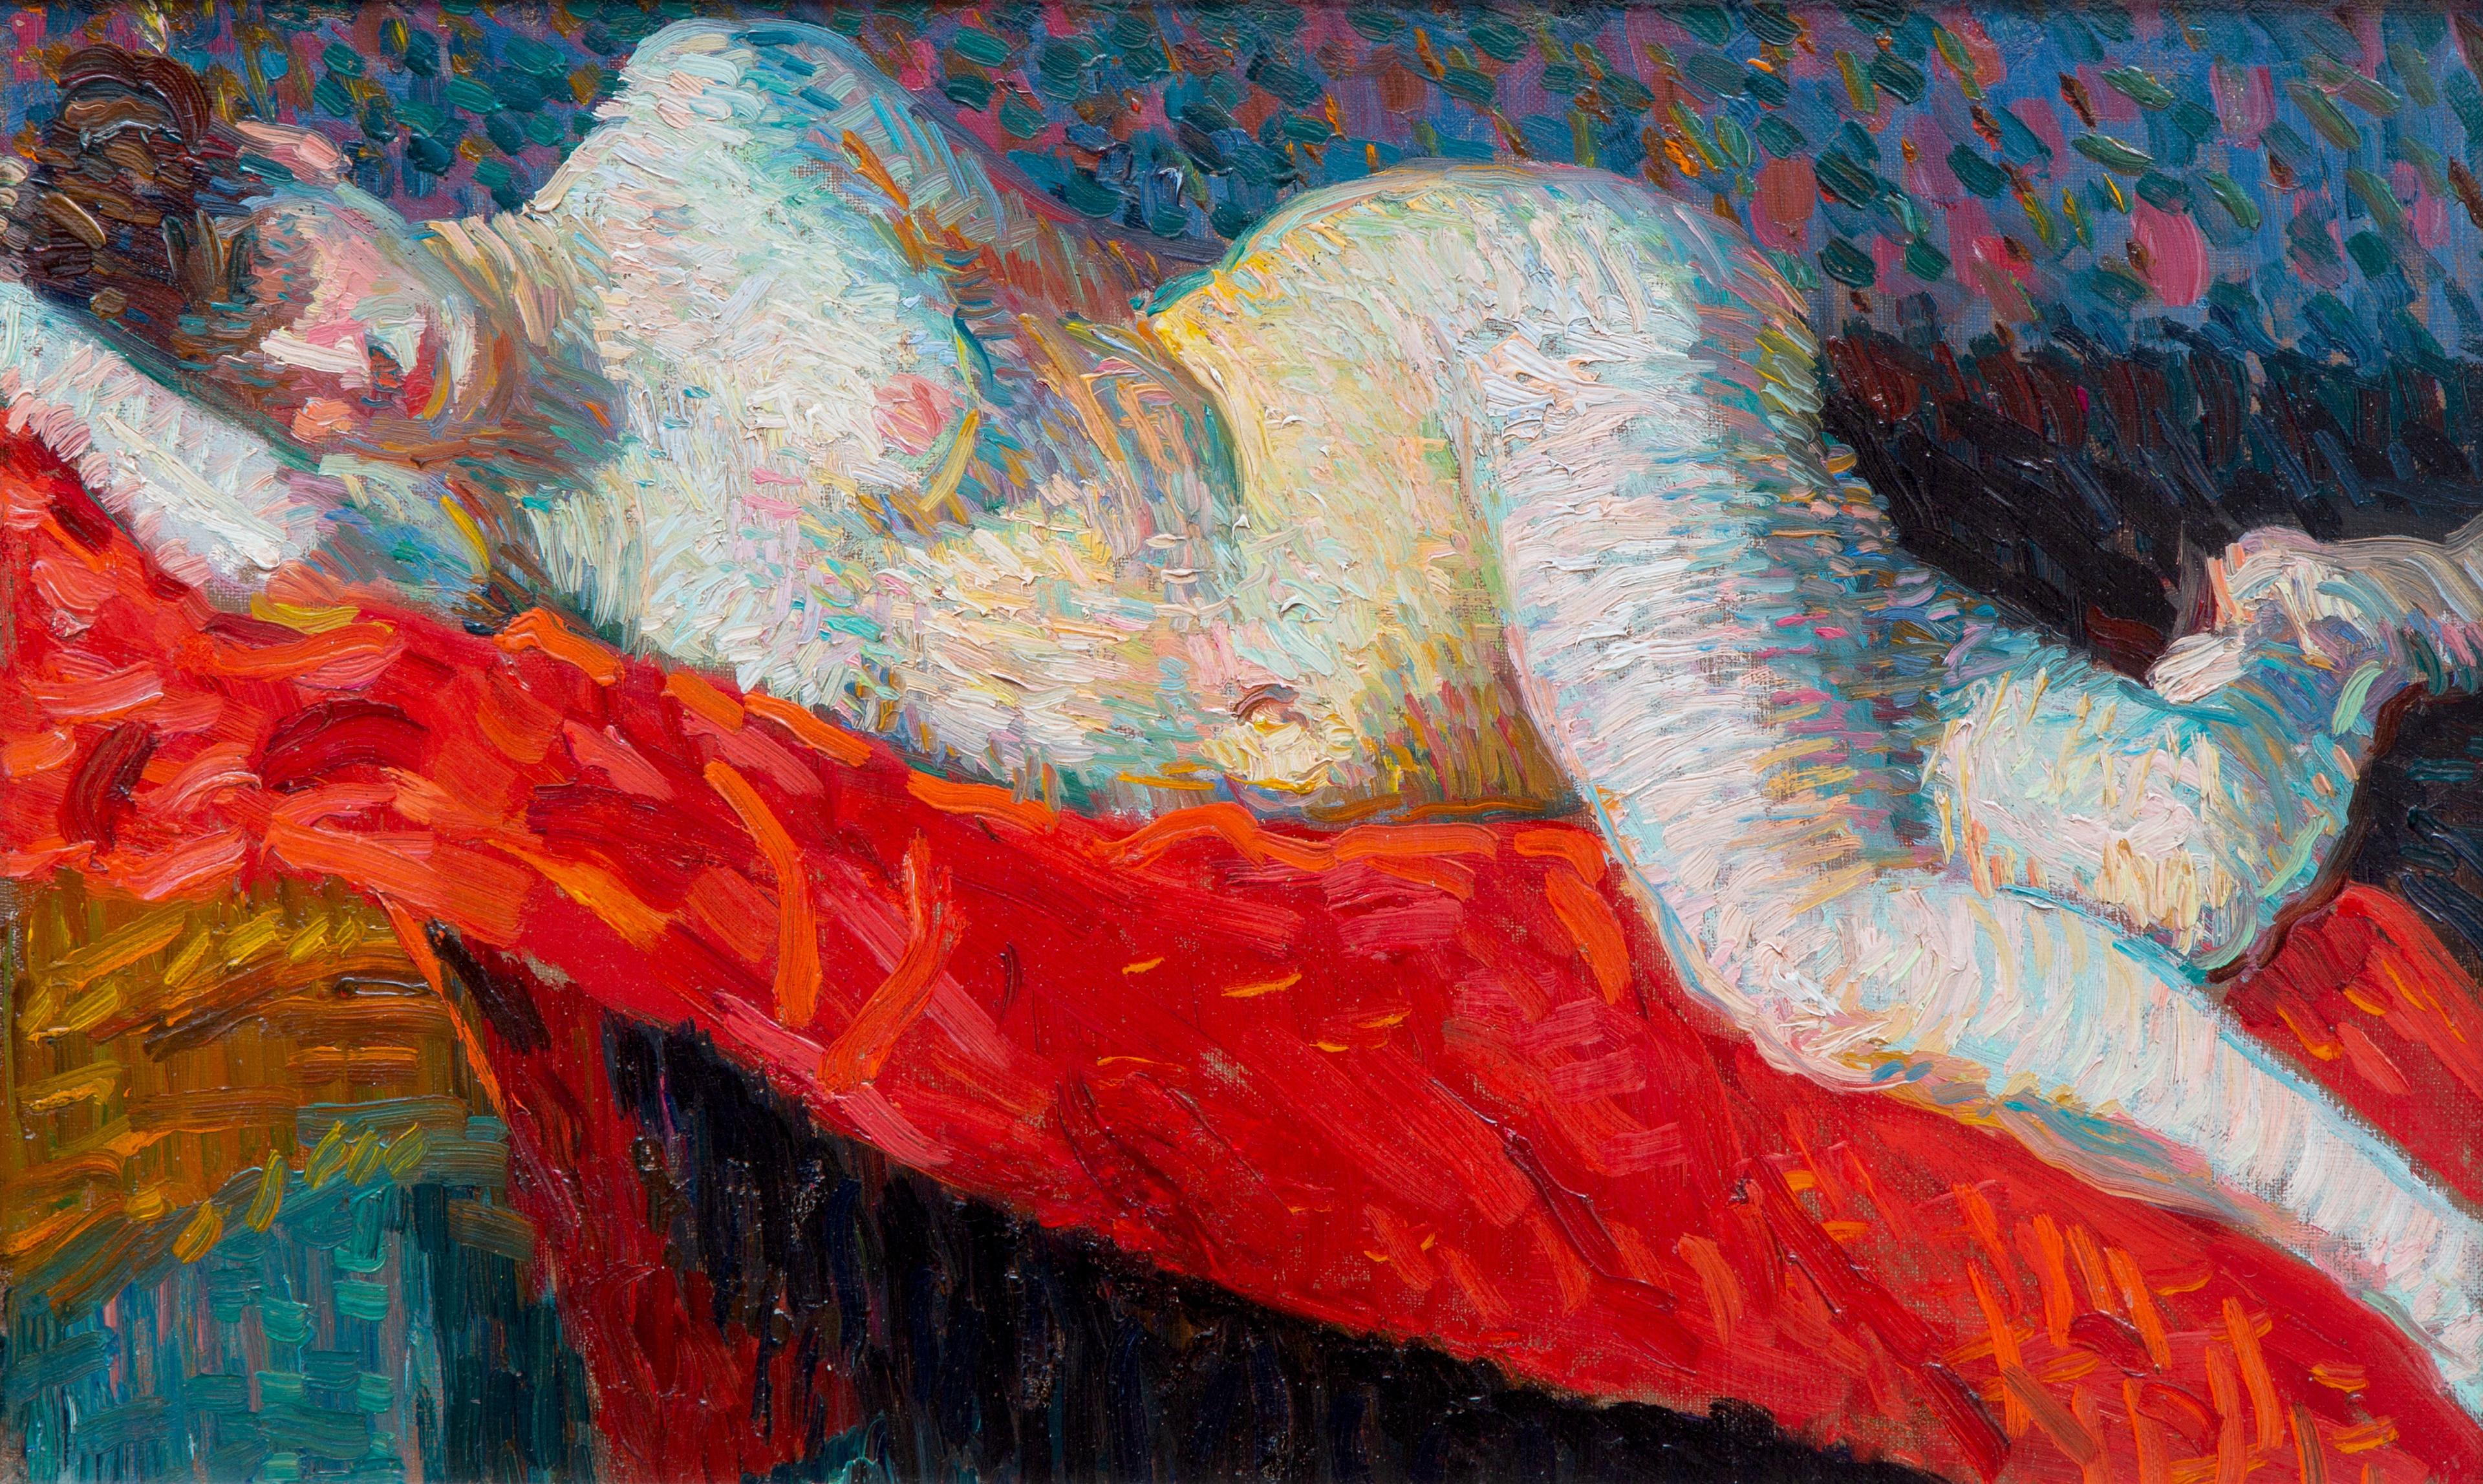 A reclining nude on a red sofa